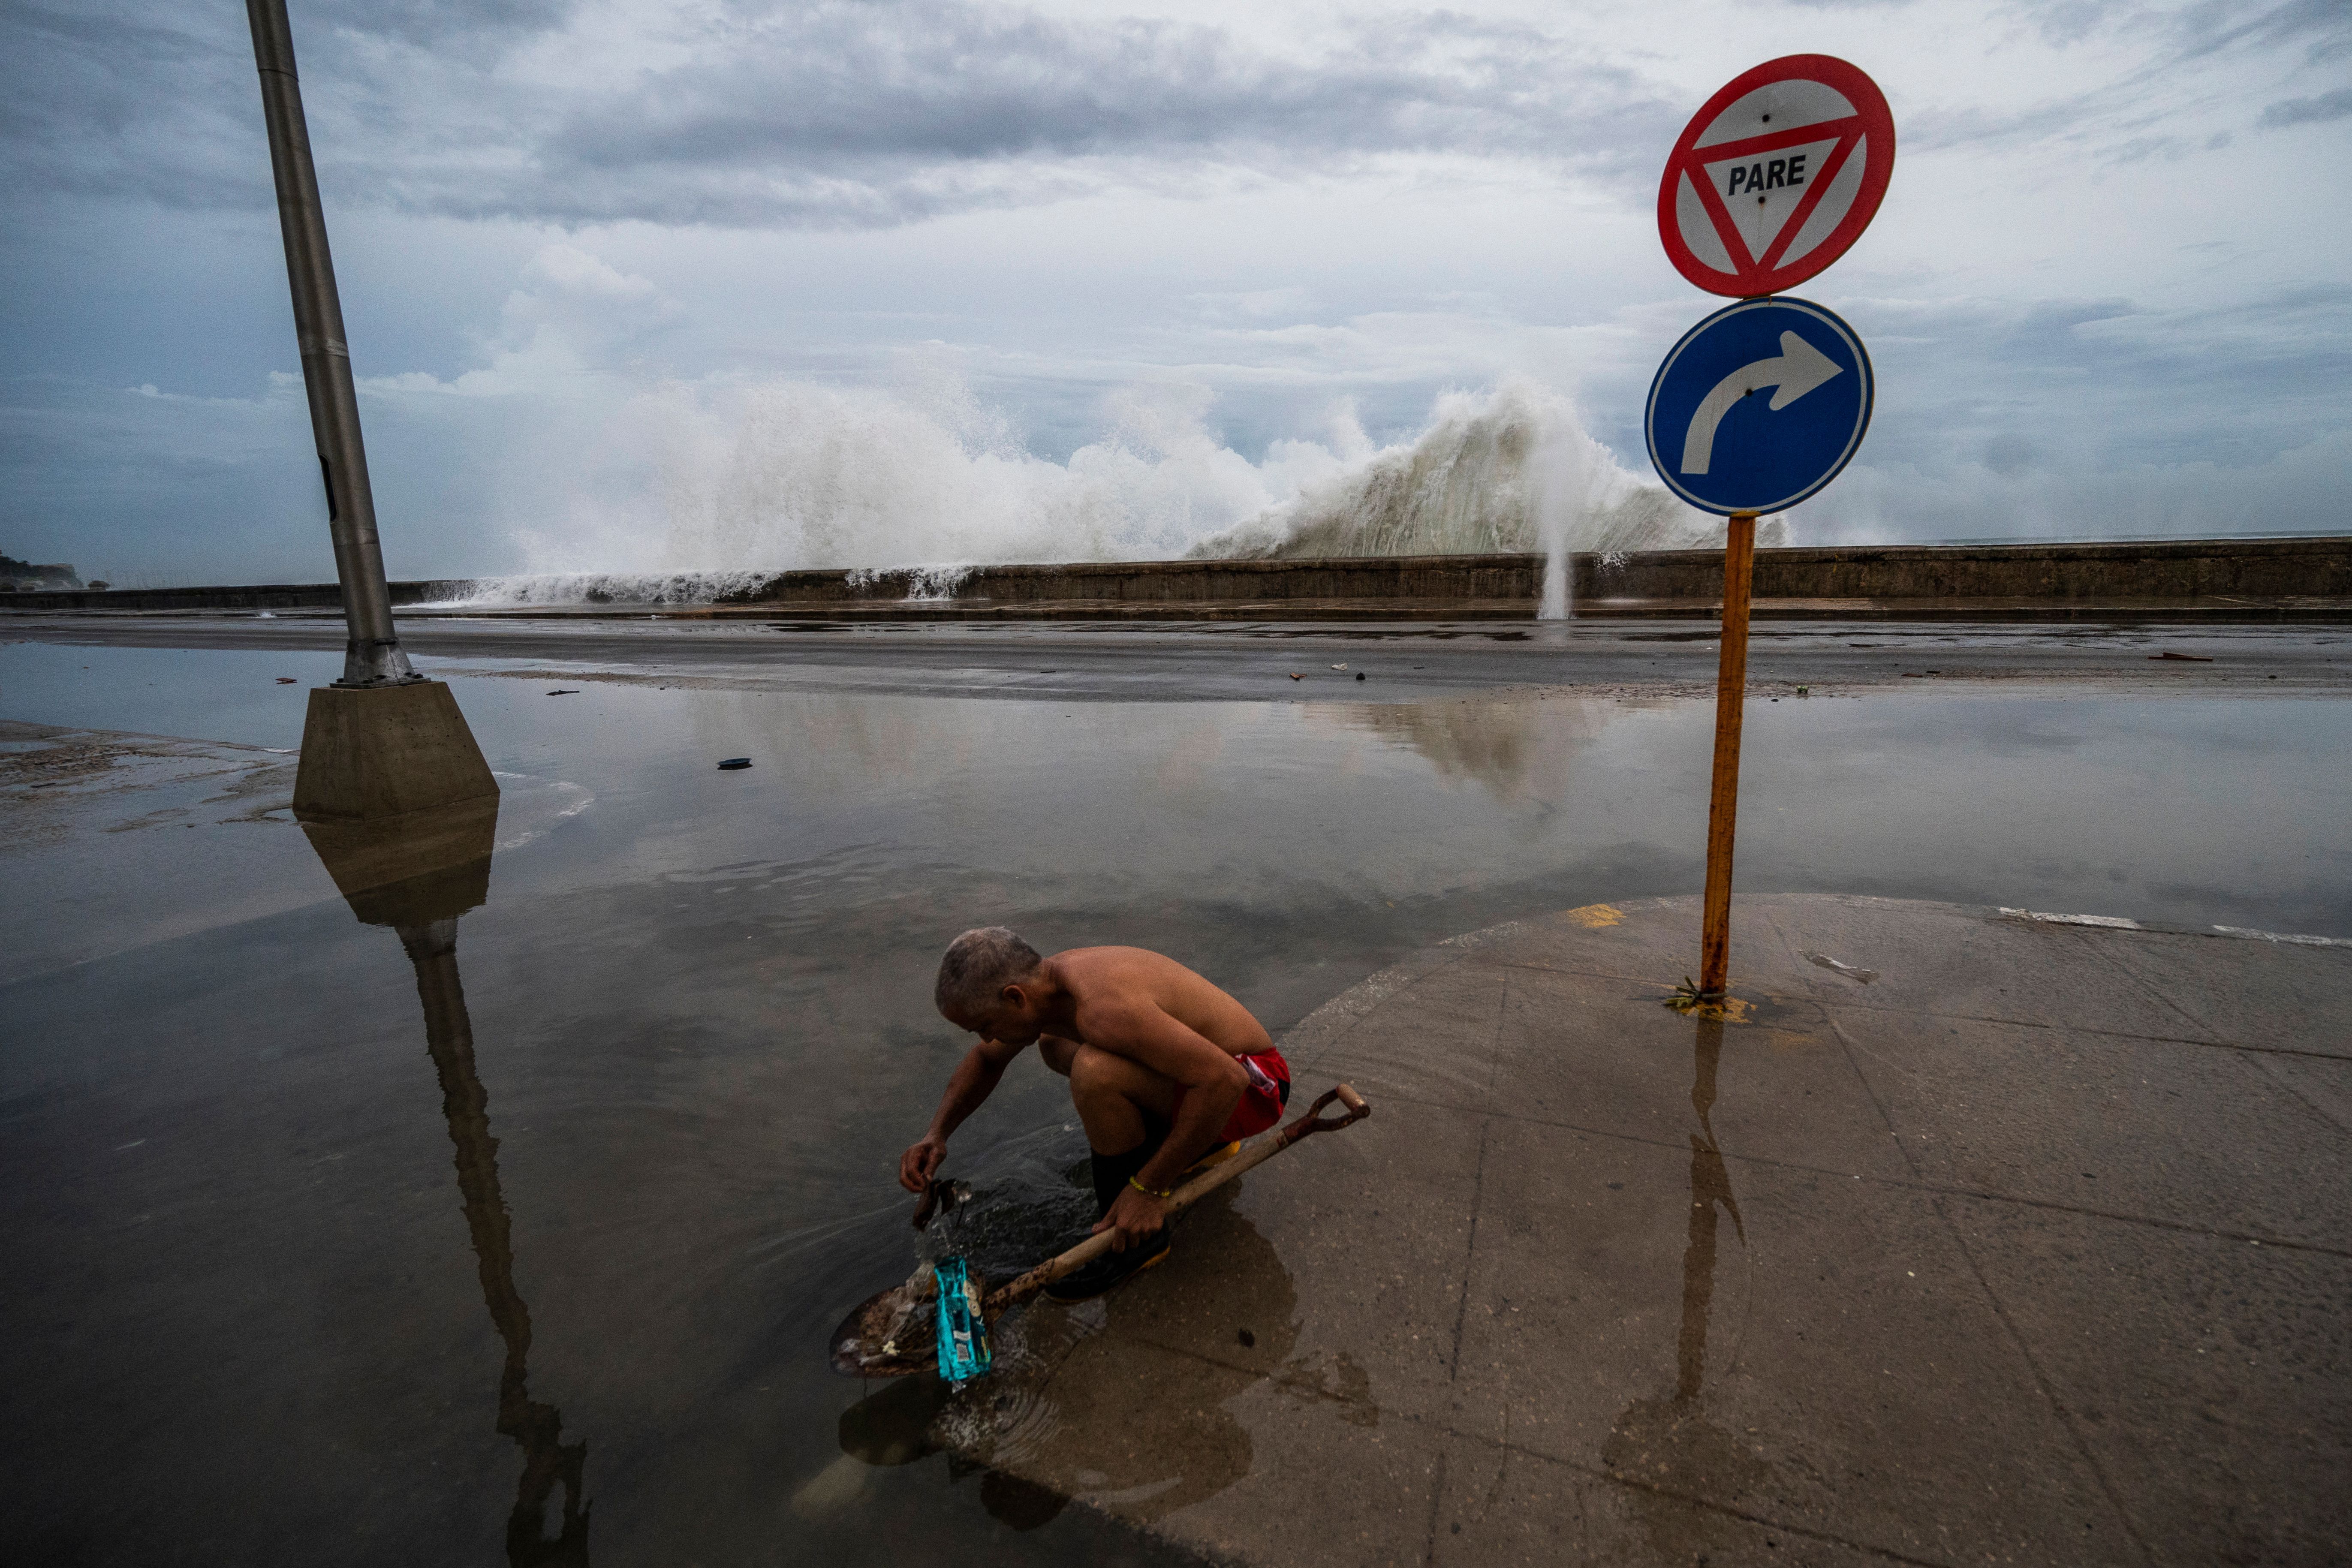 man cleaning sewer in flooded street in Cuba after Hurricane Ian